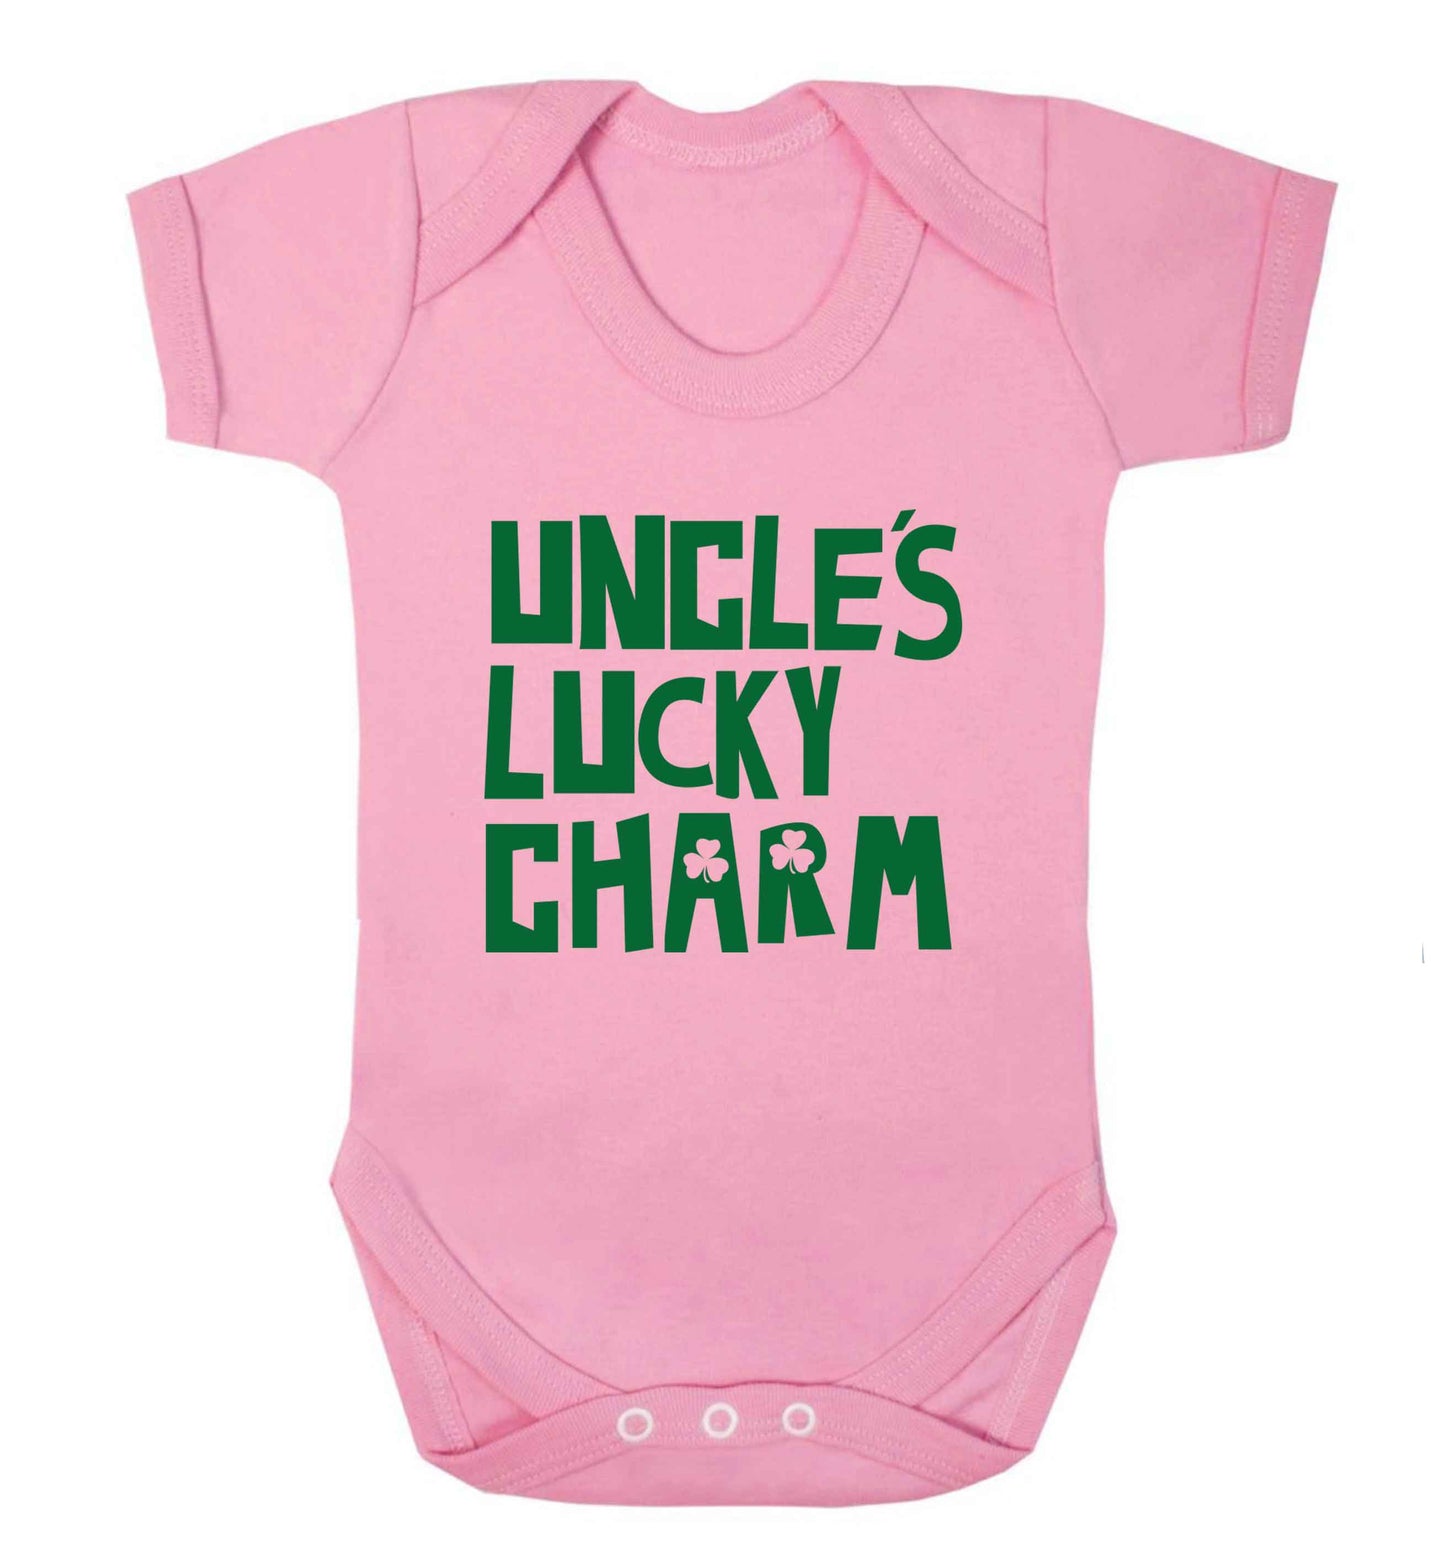 Uncles lucky charm baby vest pale pink 18-24 months